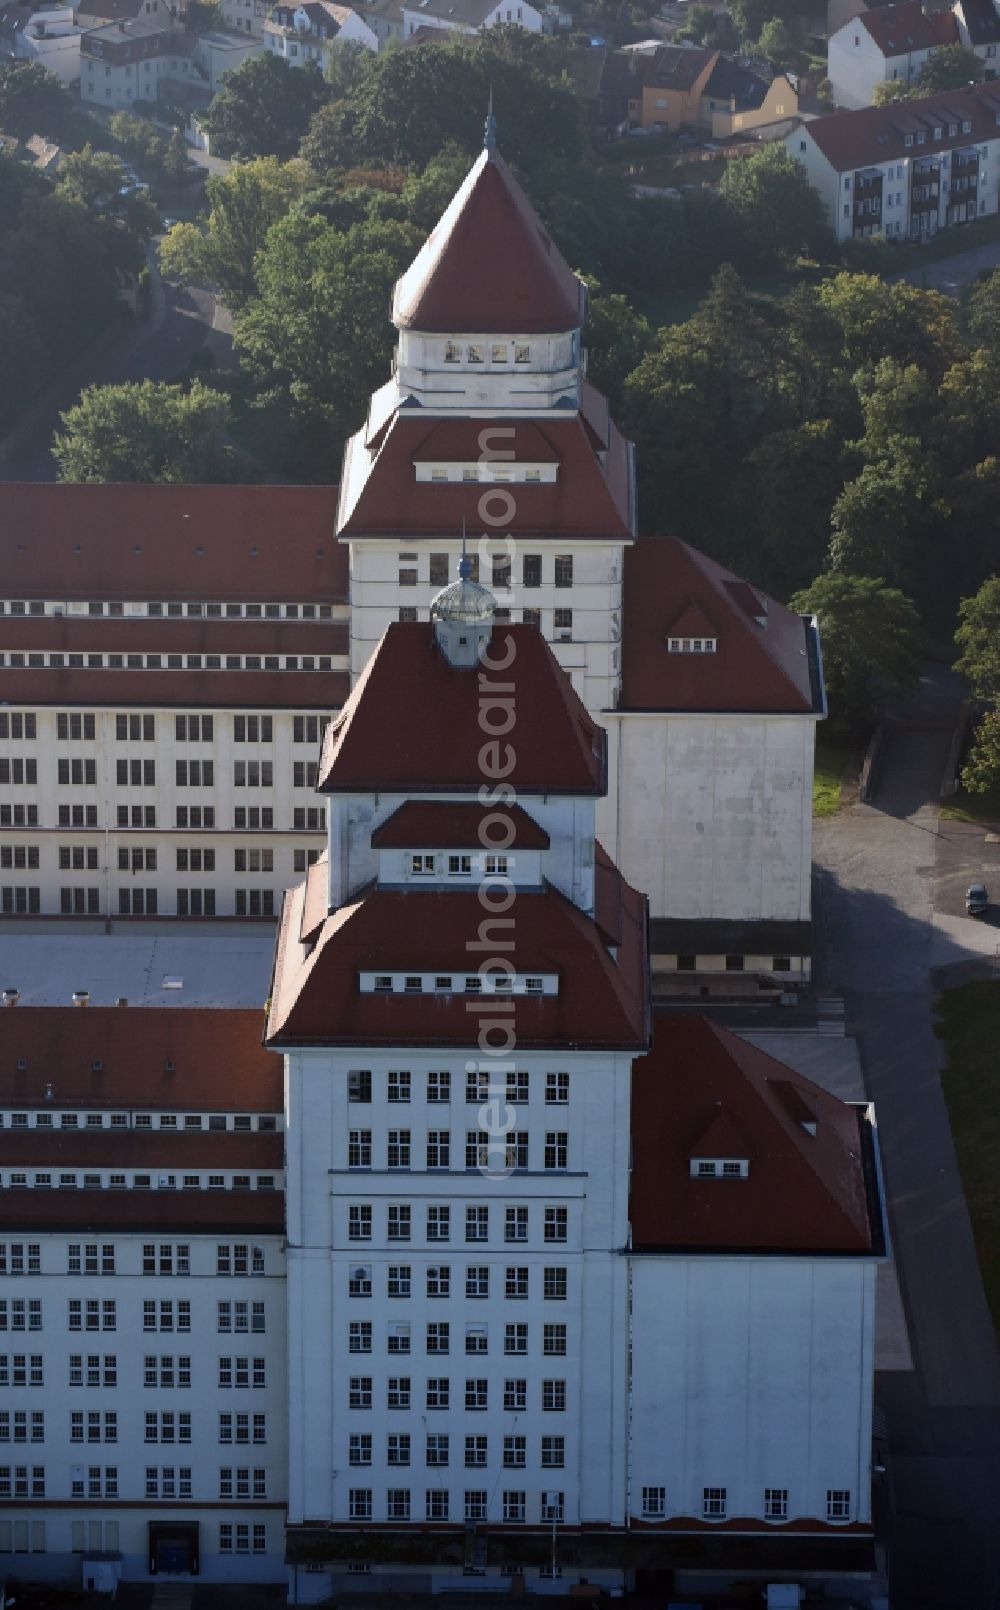 Aerial image Wurzen - The mill works on the mill race is an industrial monument, built between 1917 until 1925. The building is located in Wurzen in Saxony. The towers of the mill works are the landmarks of the city. Now home to the Wurzener Getreide AG